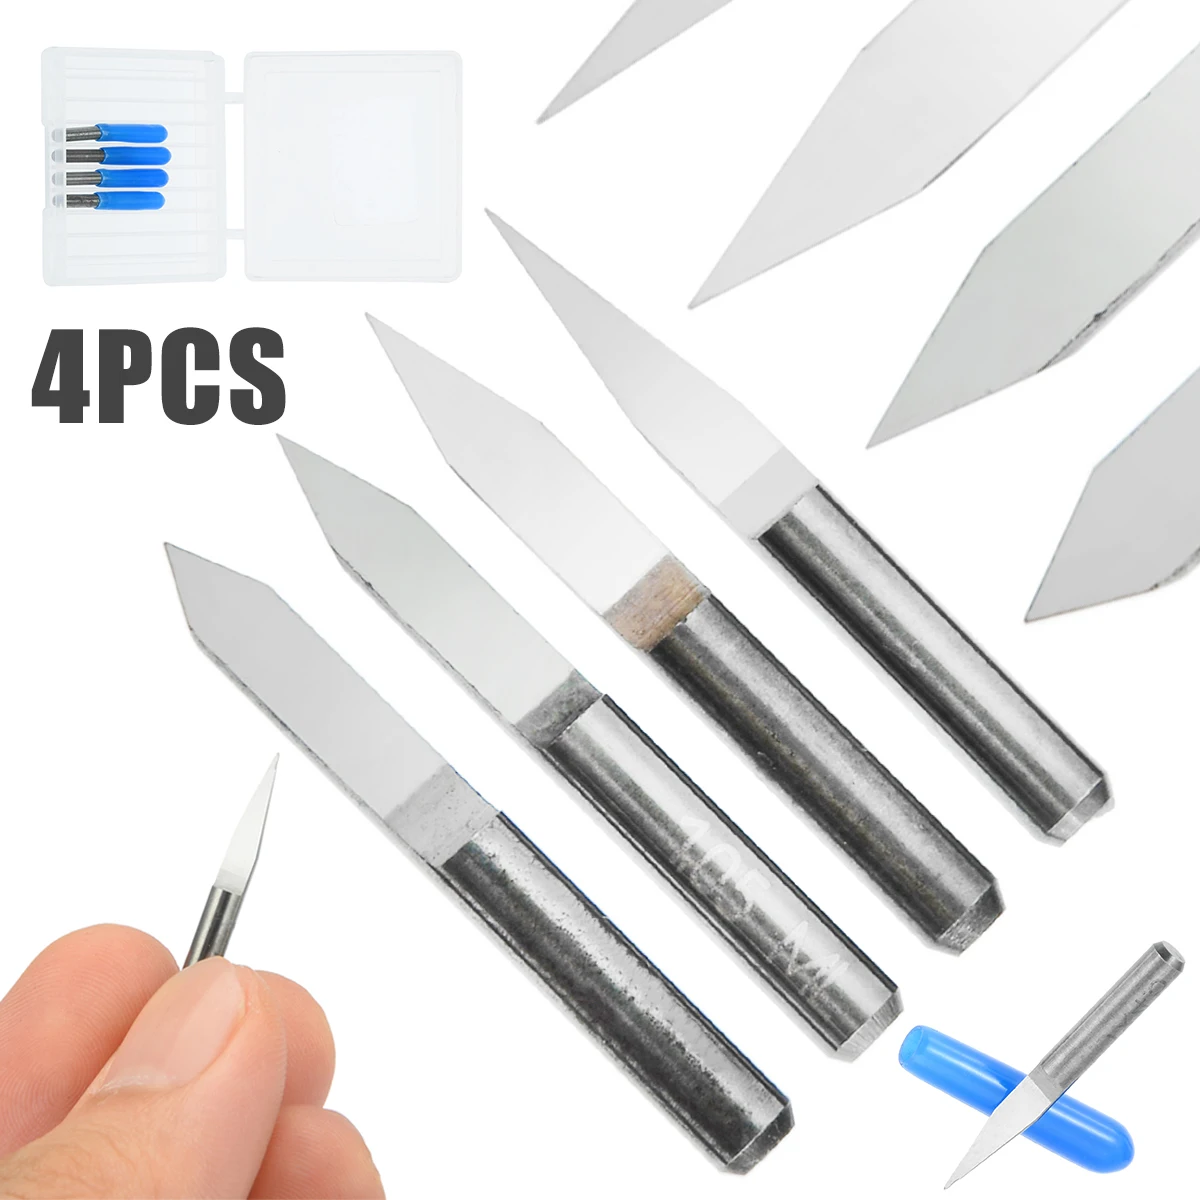 4PCS Carbide Engraving Bits Set PCB Board 3.175mm 20 30 40 60 Degree Engraving Cutters CNC Router Tool for Plastics Wood